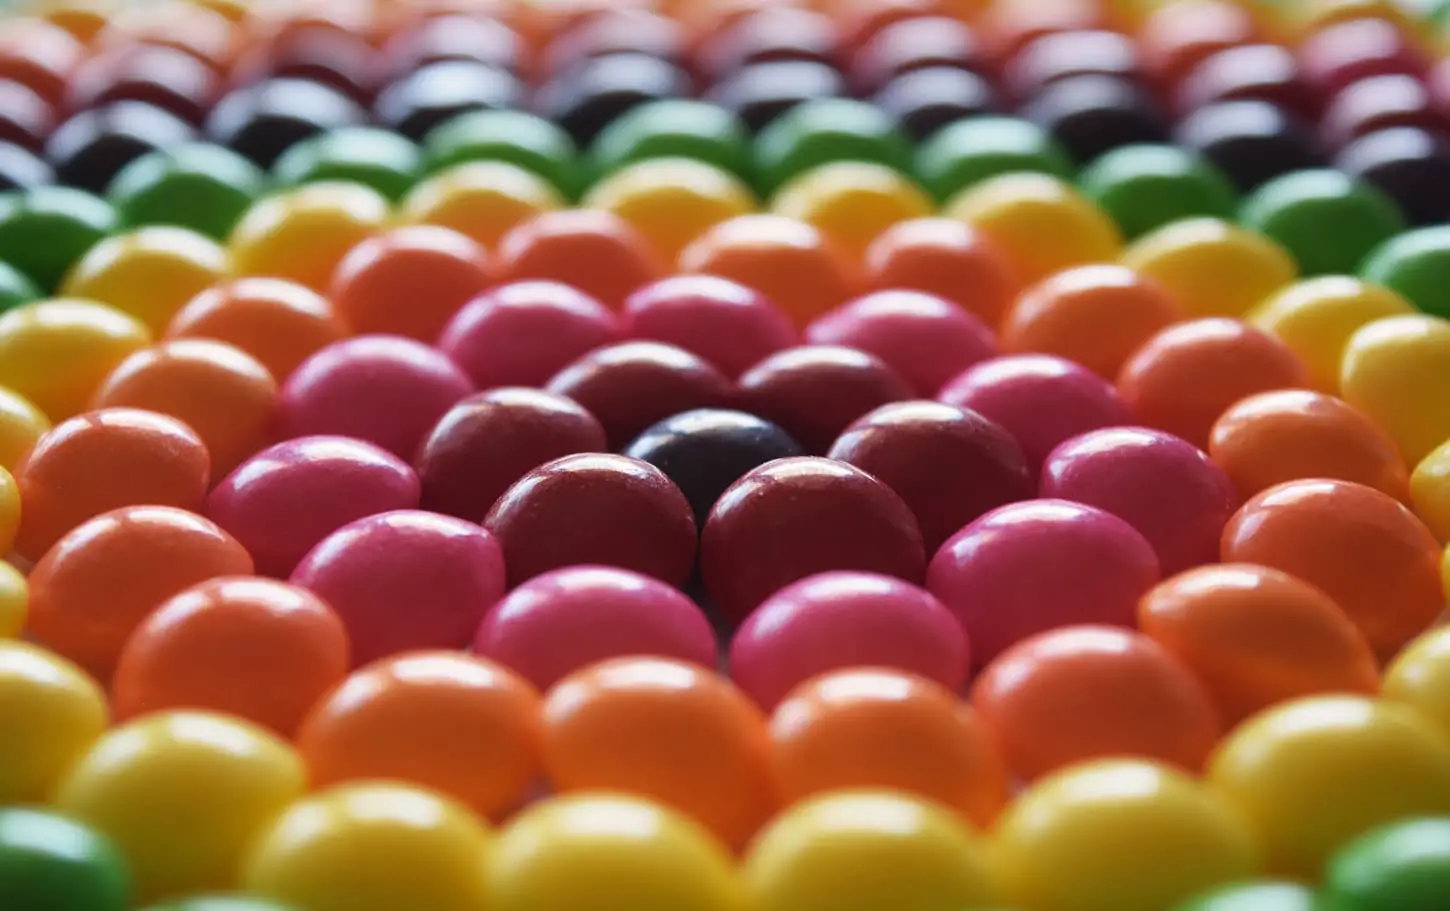 An image of colorful candies.